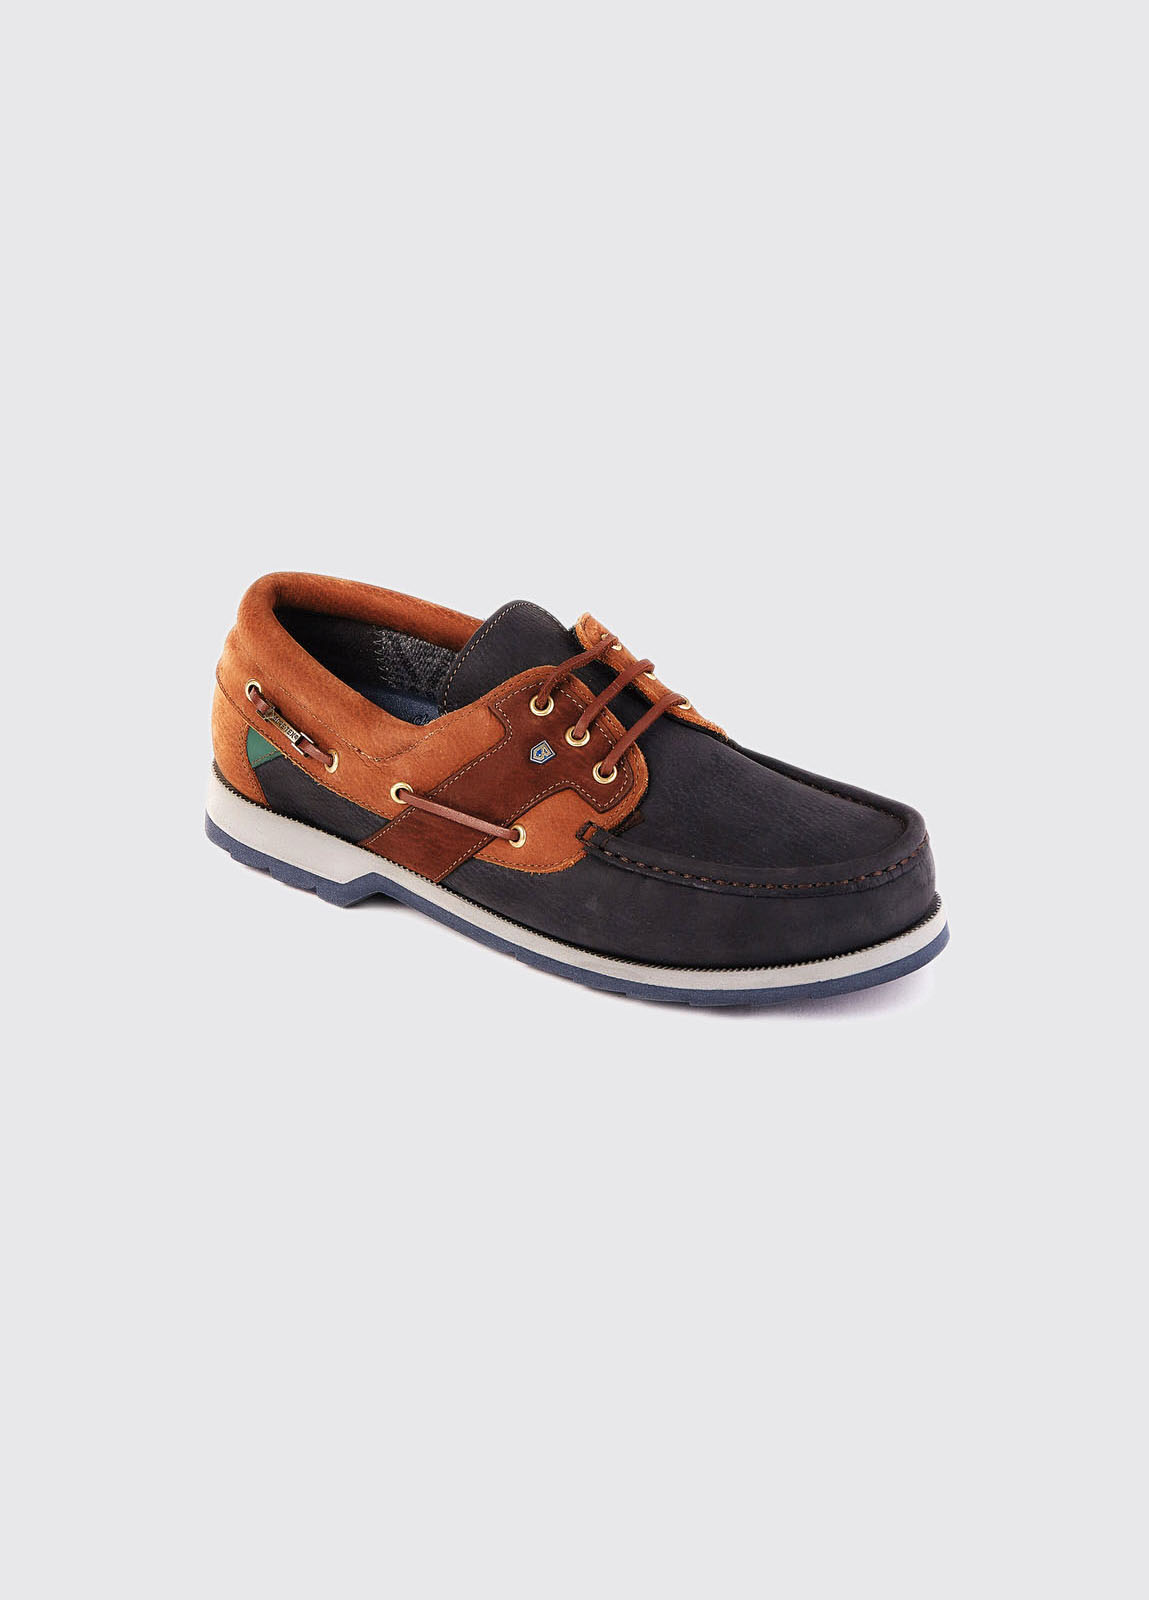 Irreplaceable Do Stræbe Clipper Navy/Brown Deck Shoes | Dubarry IE